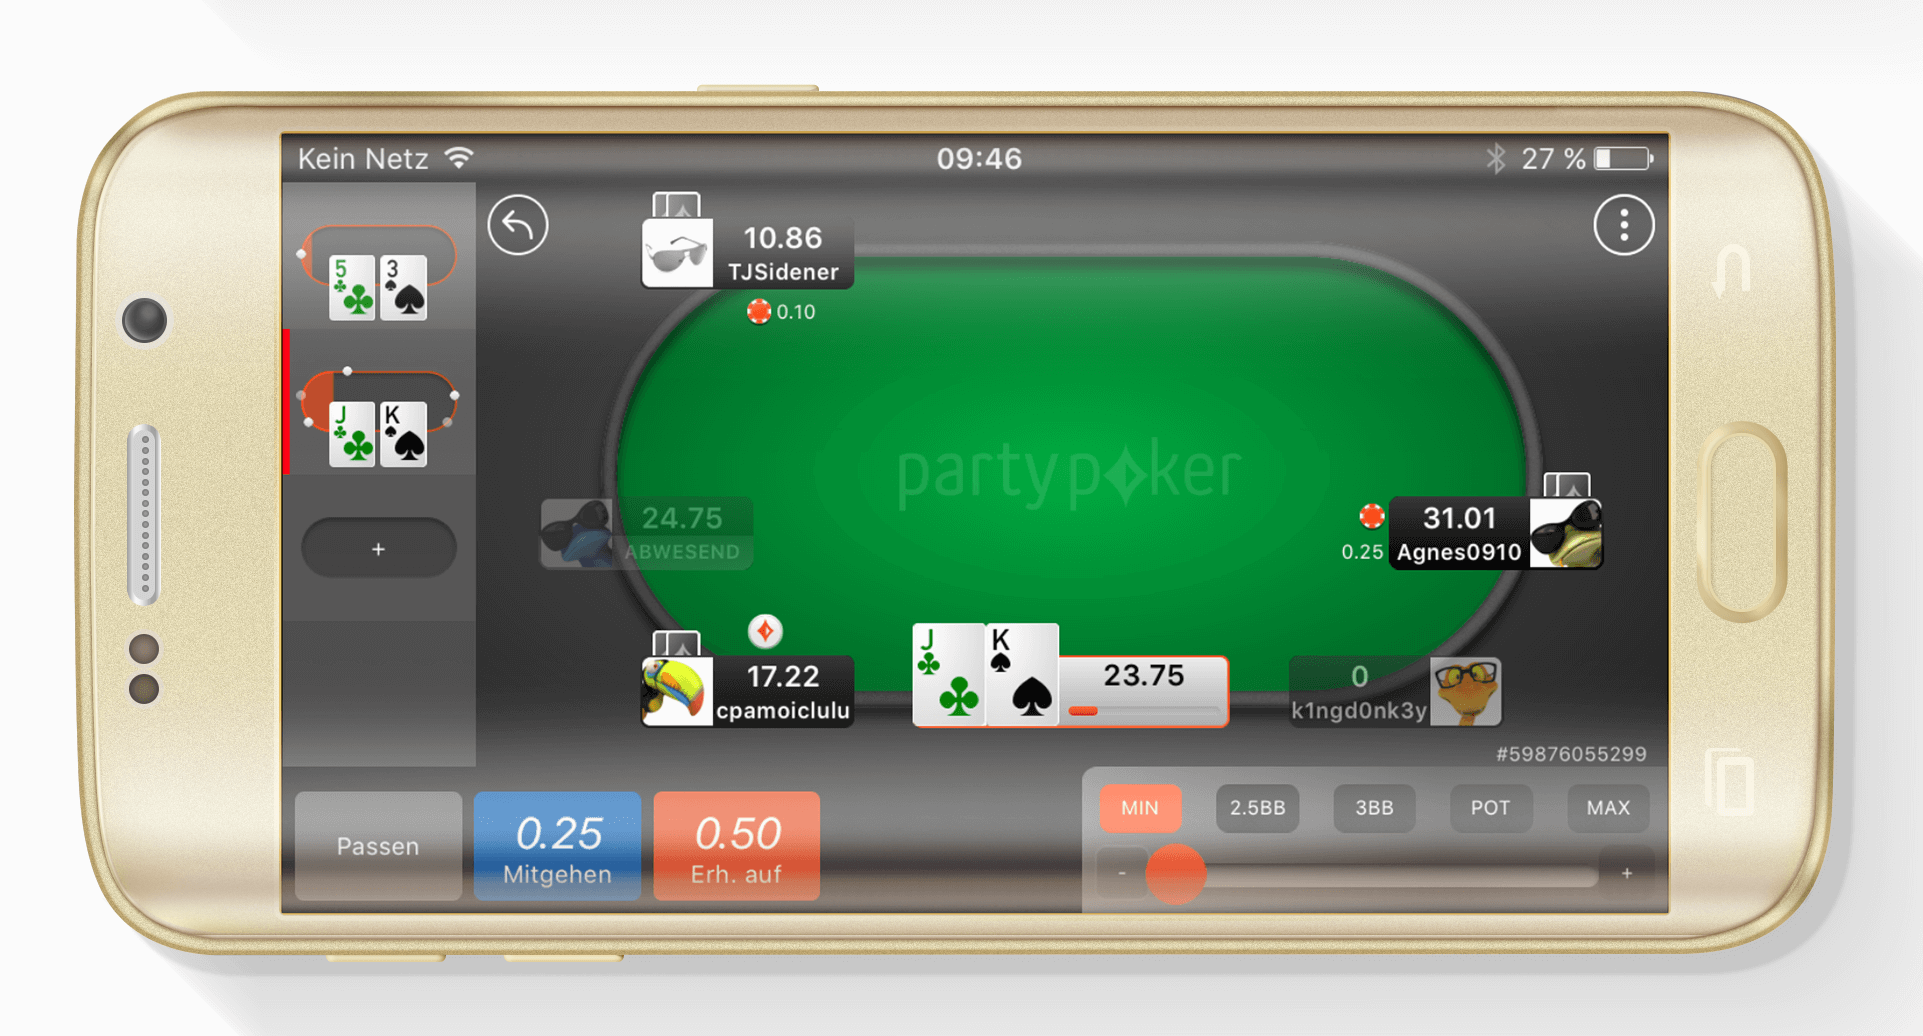 Real money poker android